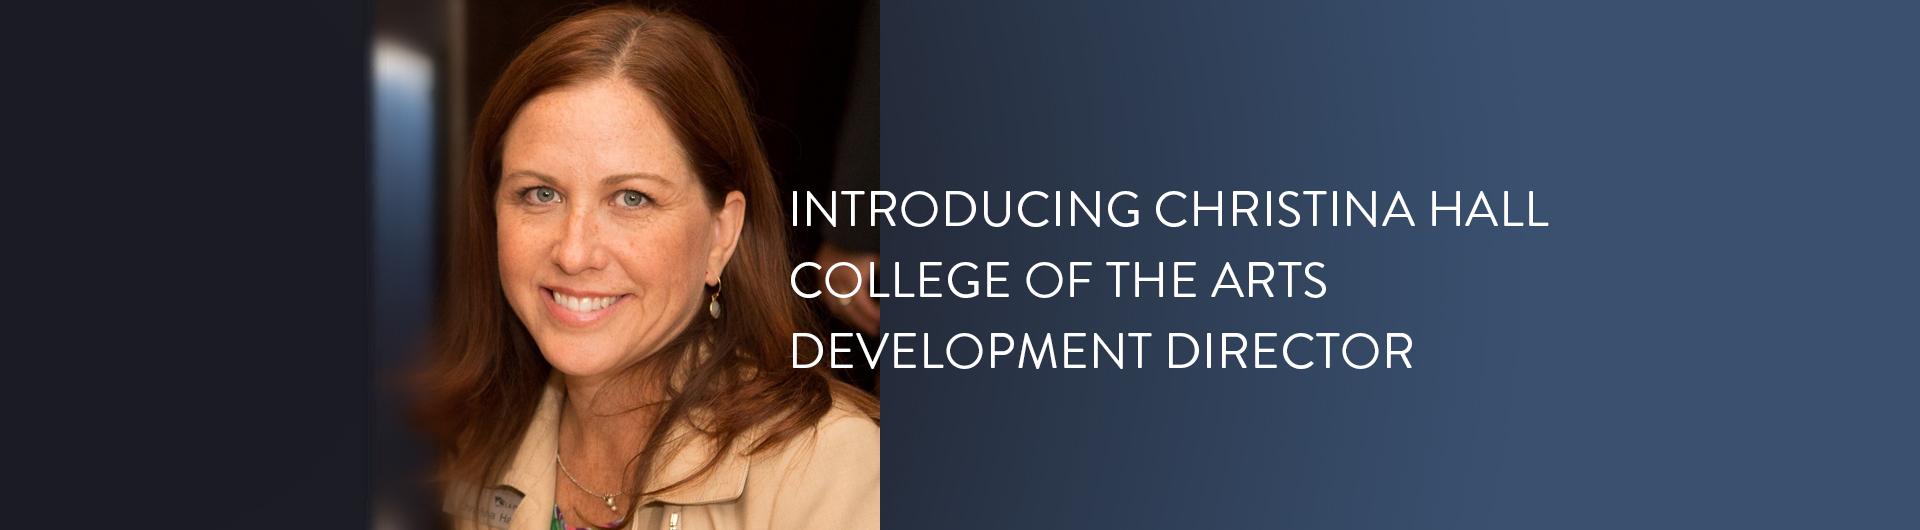 Introducing Christina Hall College of the Arts Development Director 